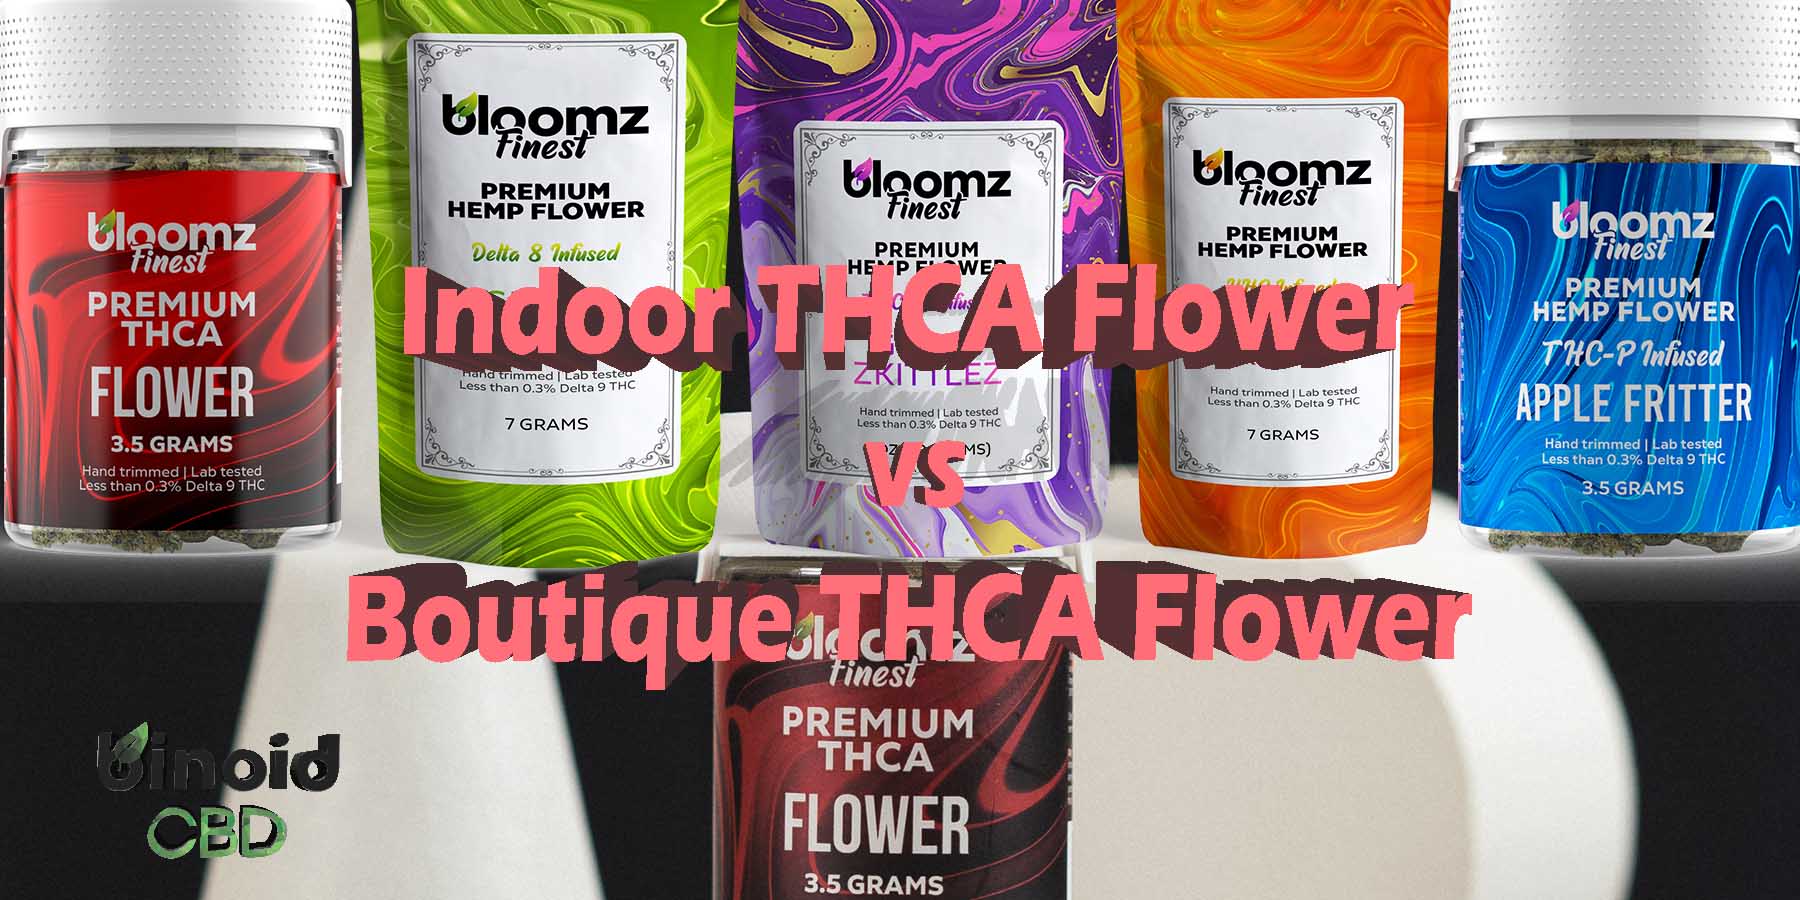 Indoor THCA Flower vs Boutique THCA Flower Boutique THCA Flower Where To Get Near Me Best Place Lowest Price Coupon Discount Strongest Brand Bloomz